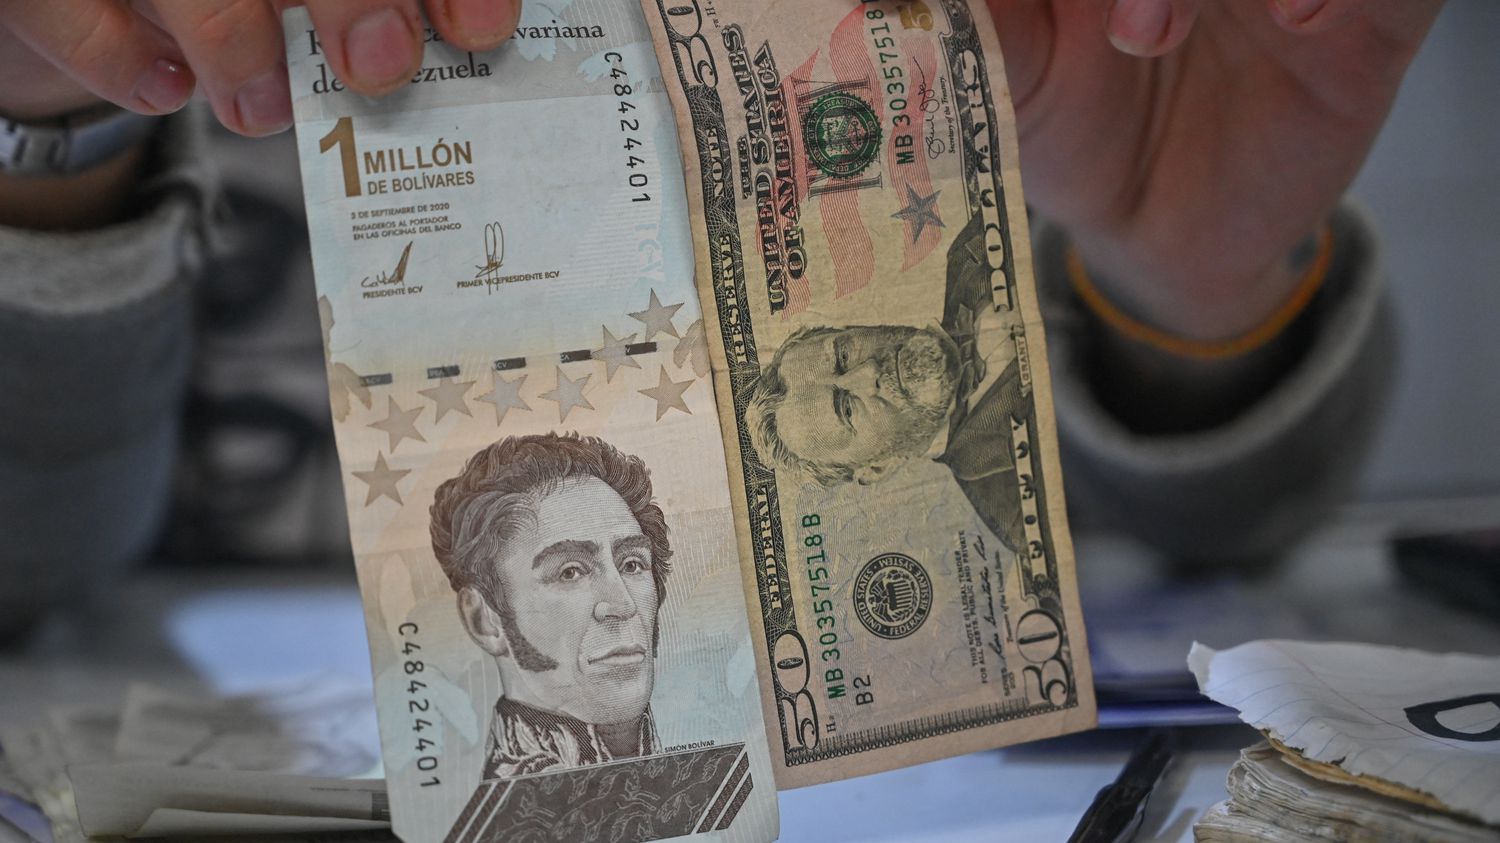 Hyperinflation affected the removal of six zeros from the currency of Venezuela

